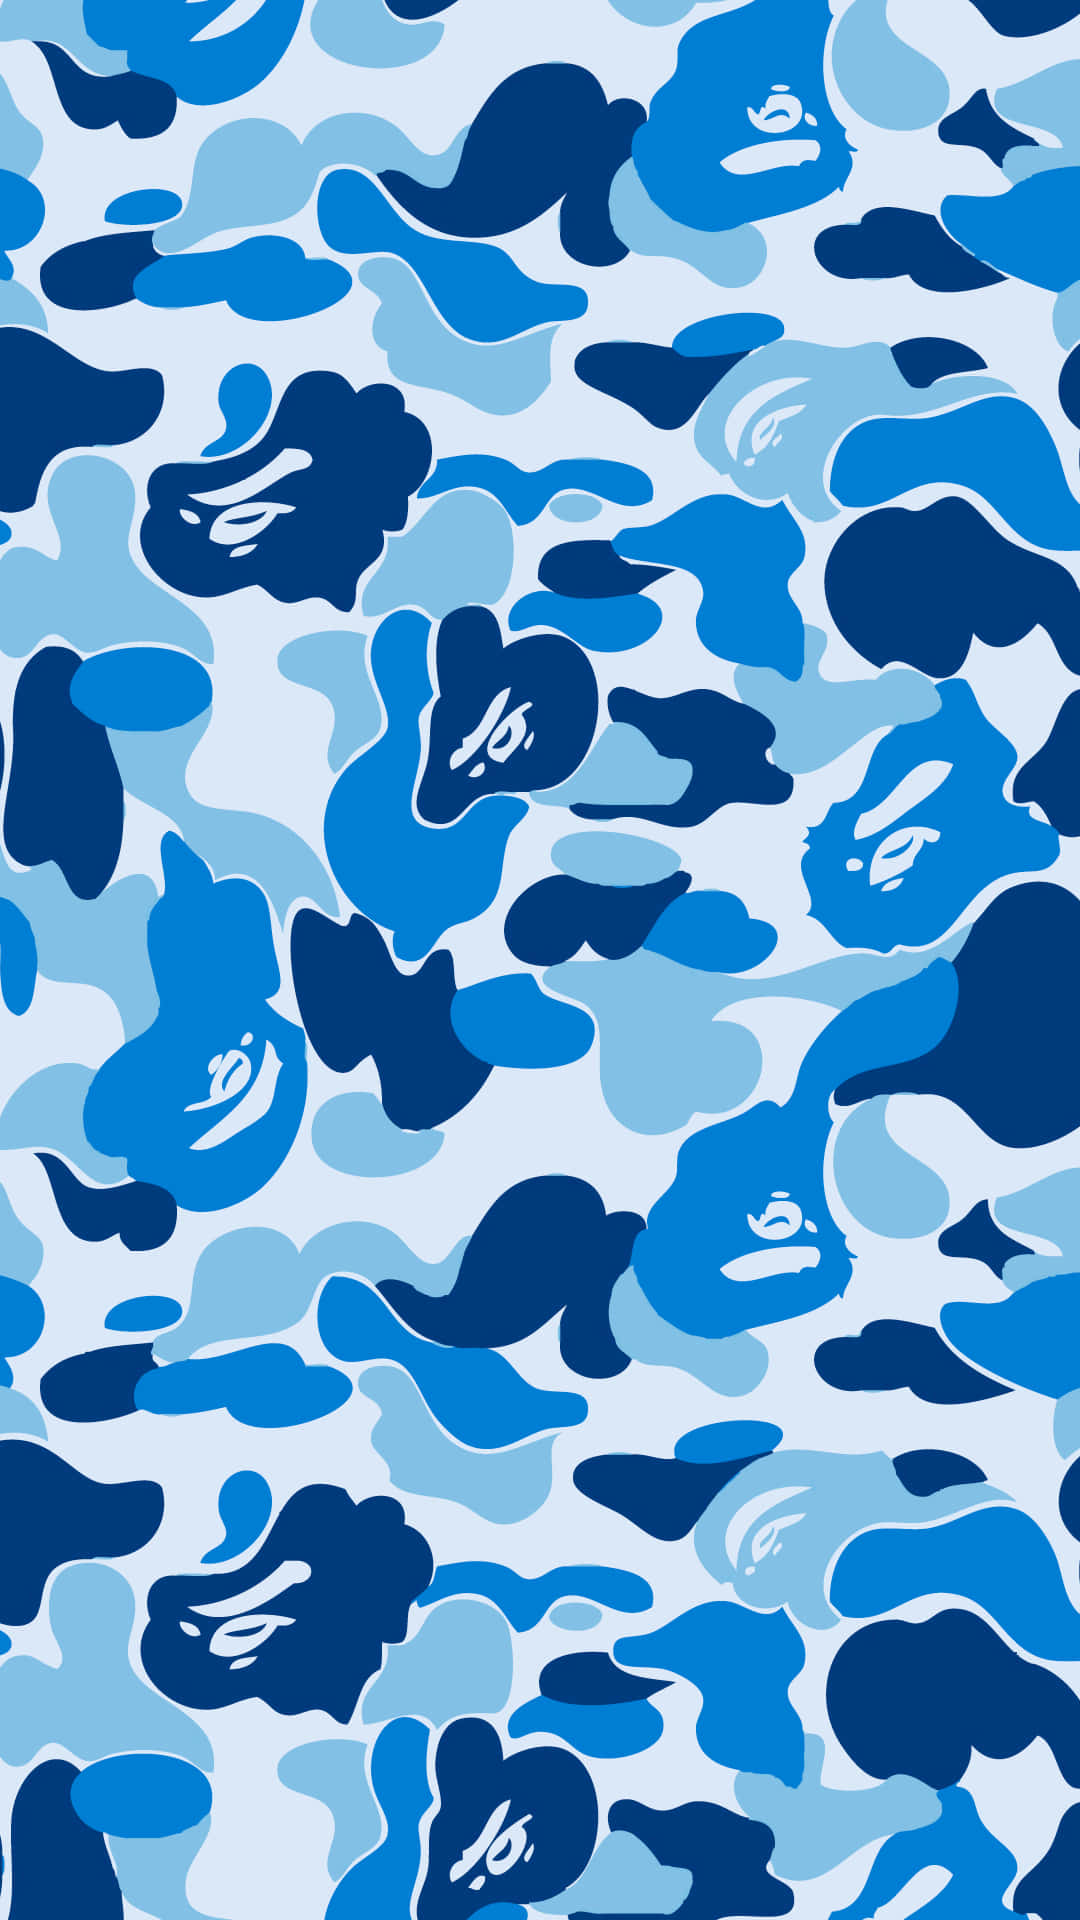 Stay Stylish with the BAPE Iphone Wallpaper